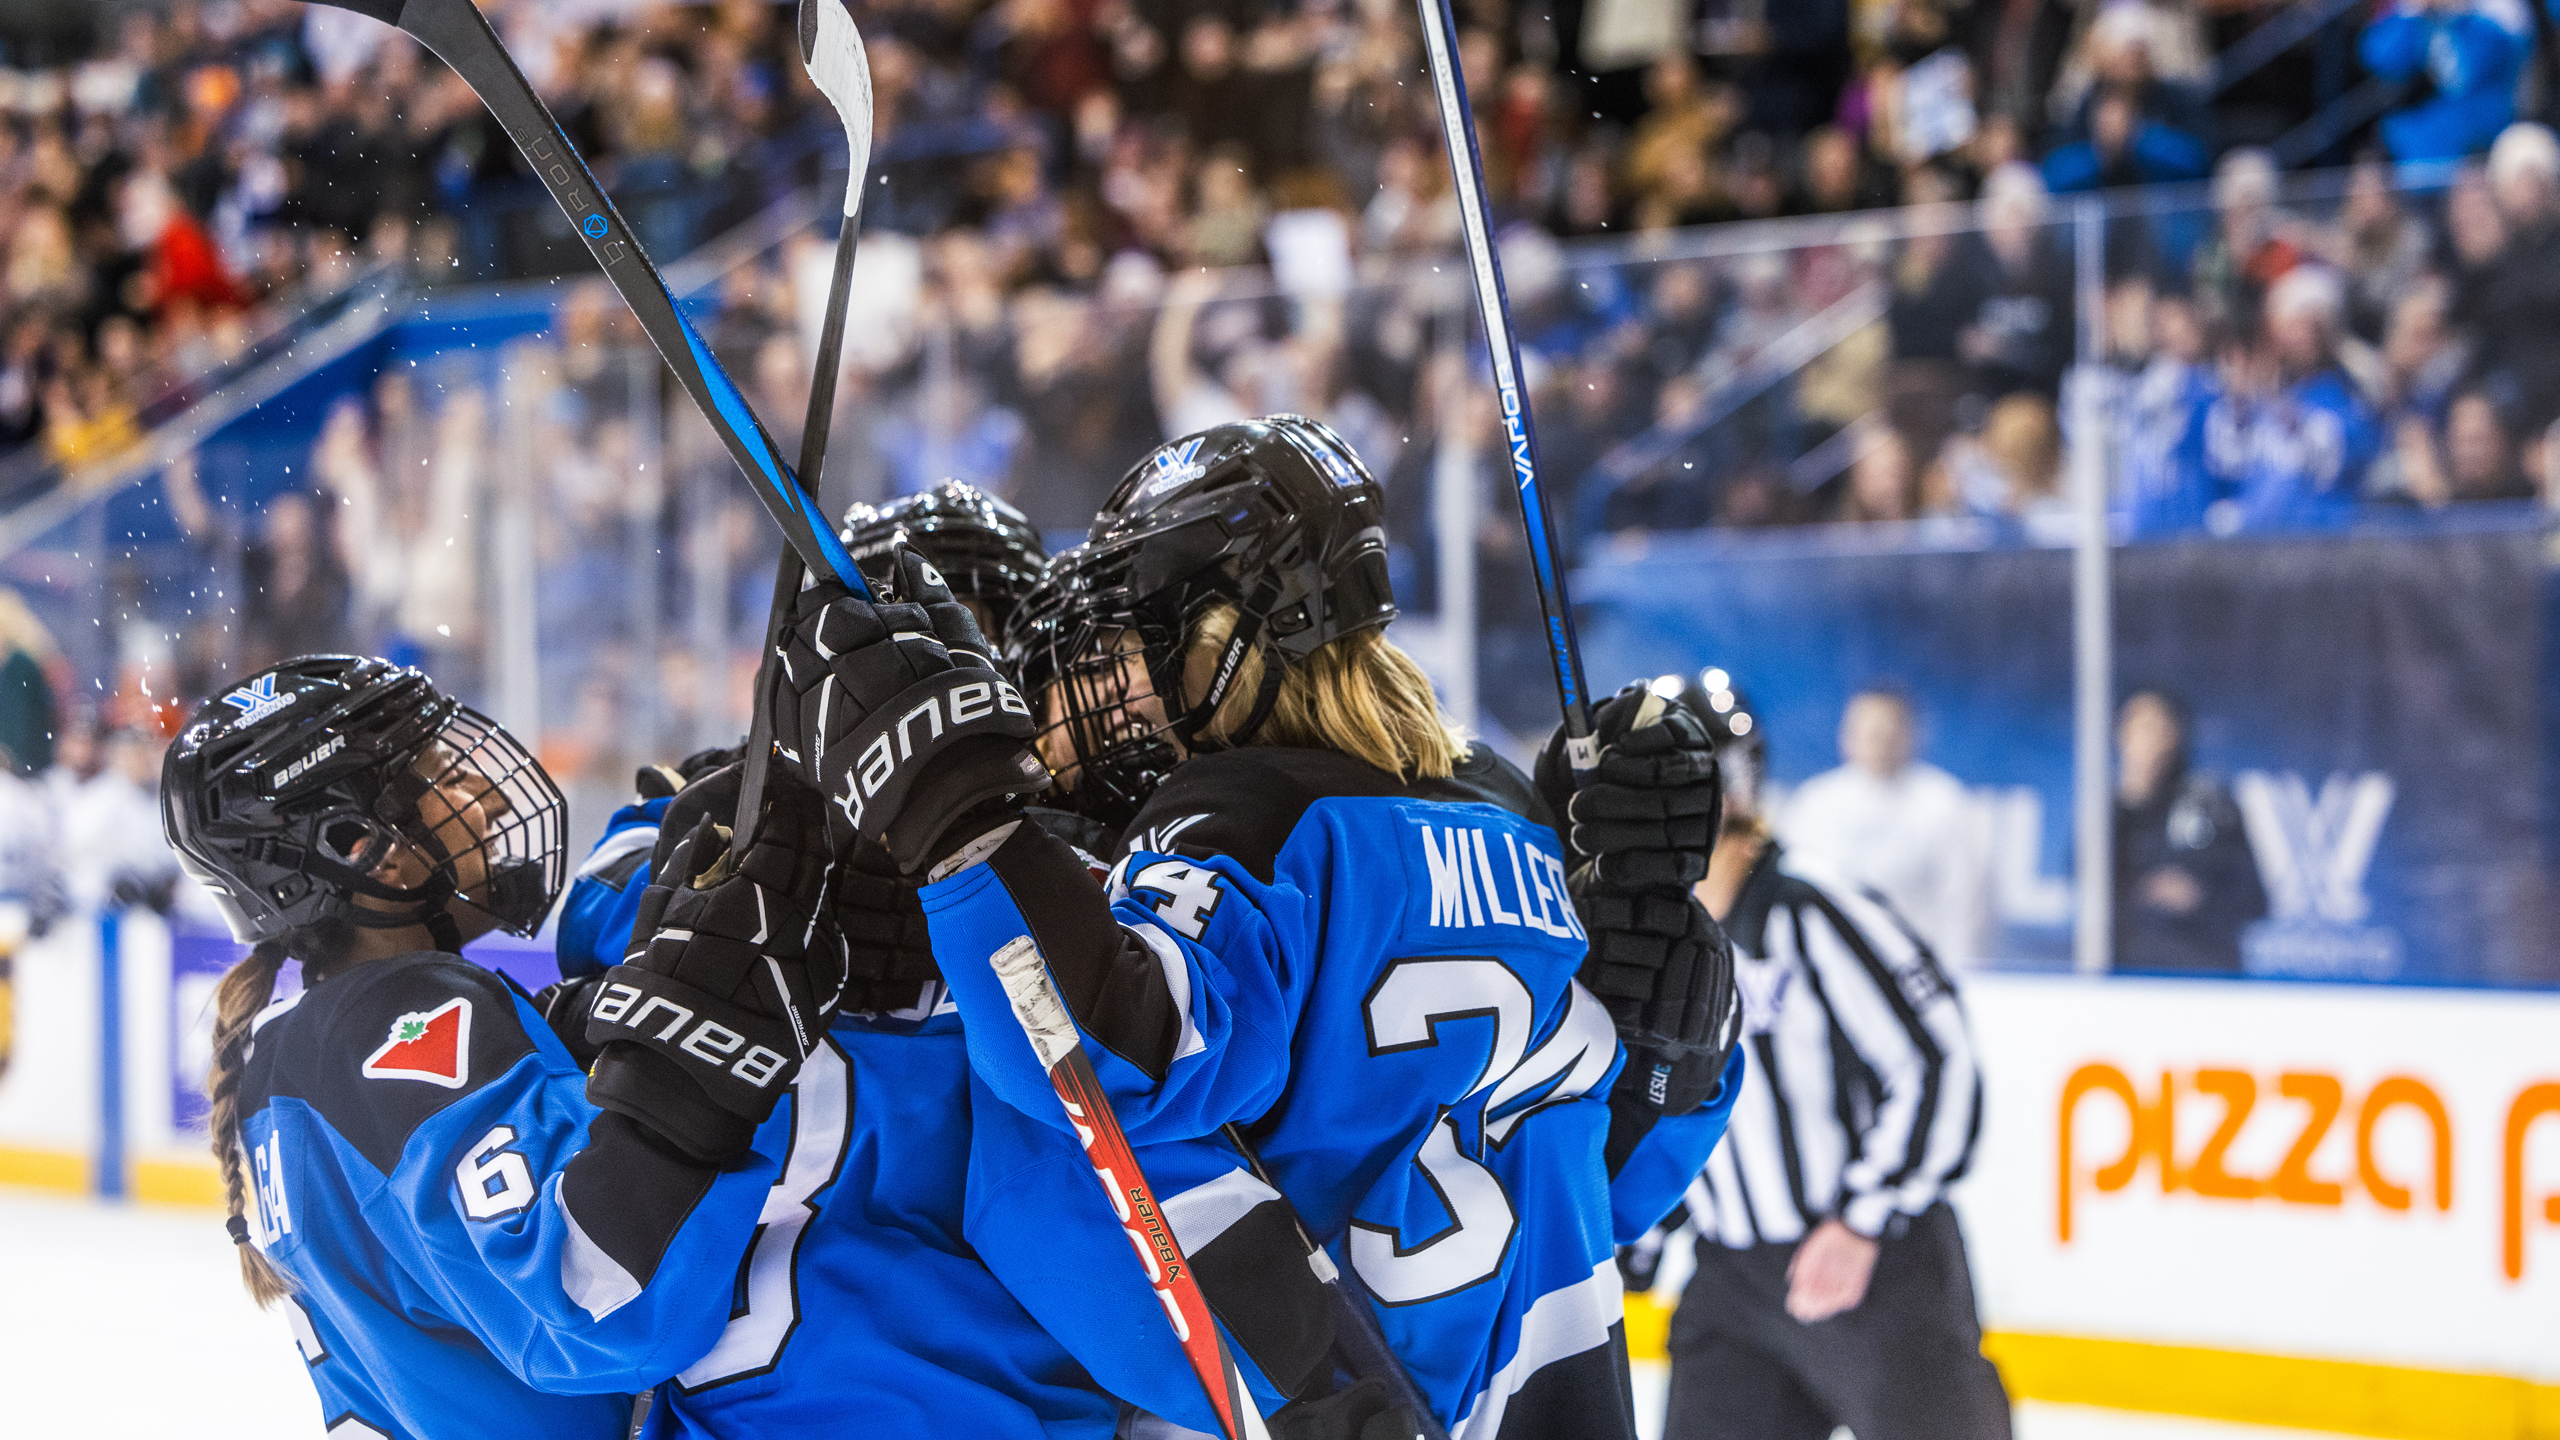 Players from PWHL Toronto celebrate a goal